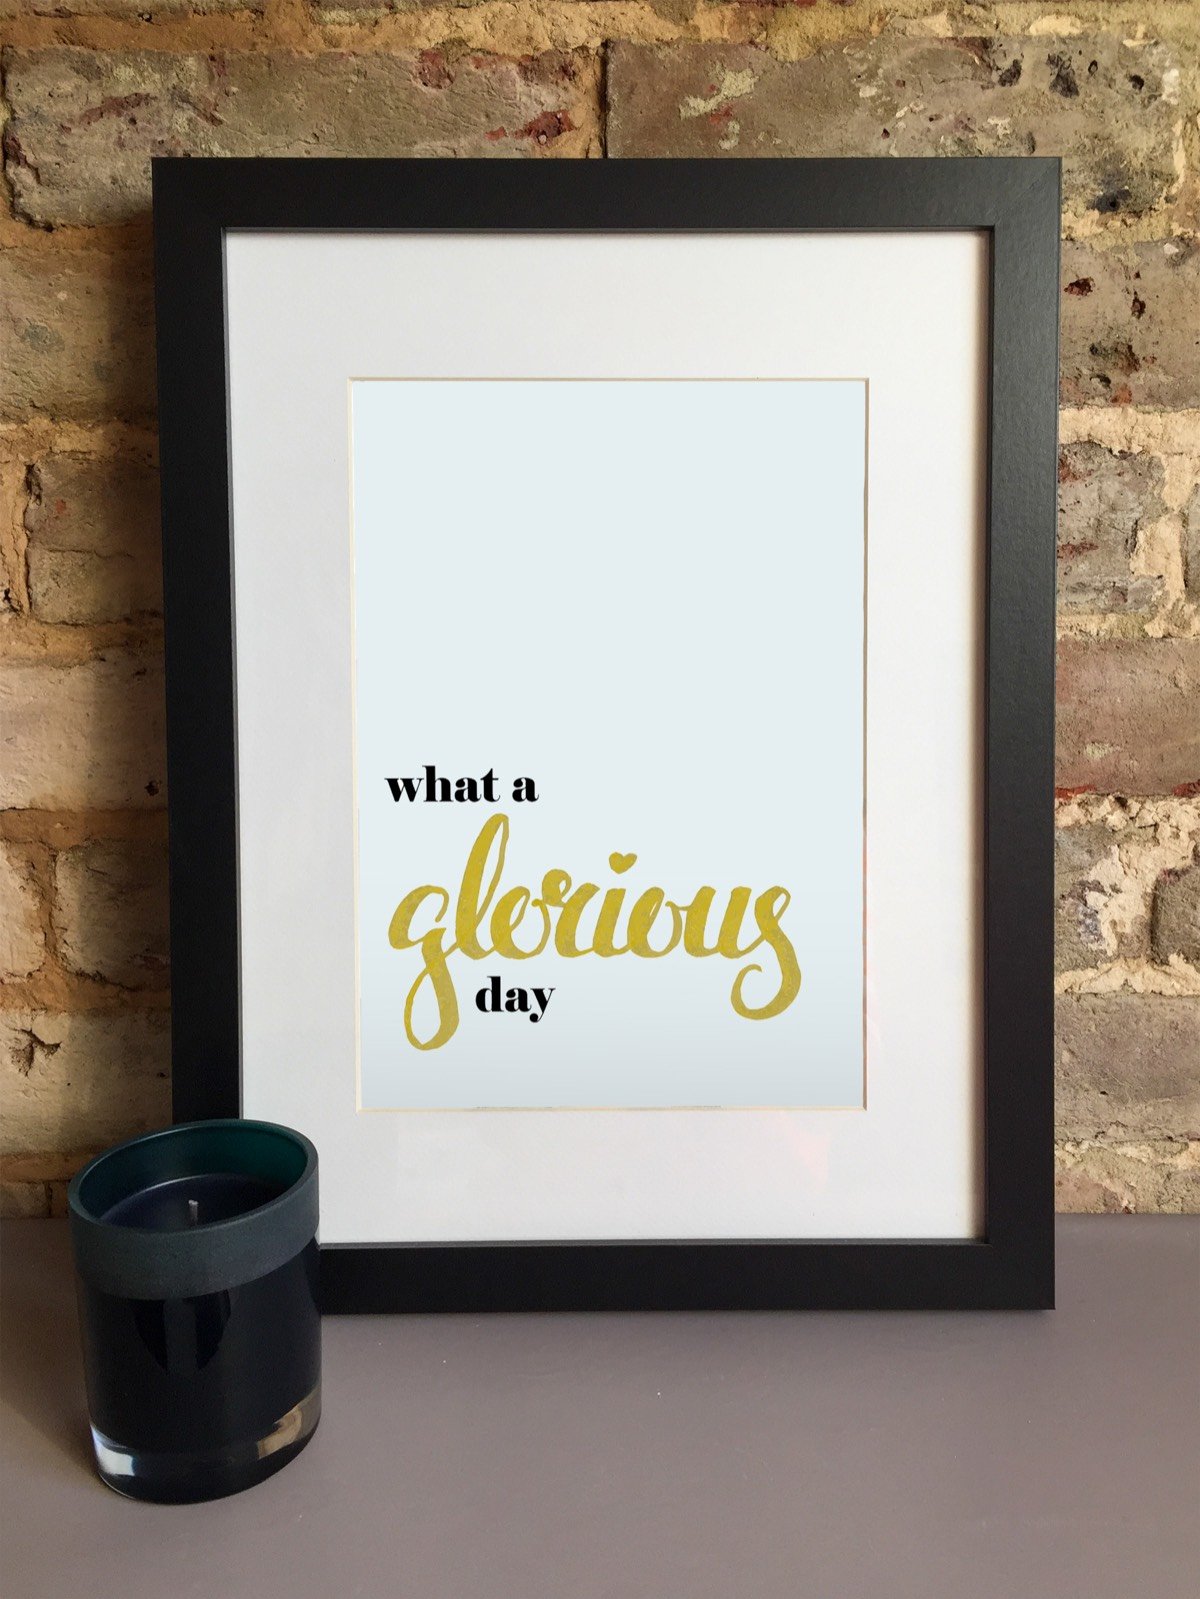 What a glorious day framed artwork print